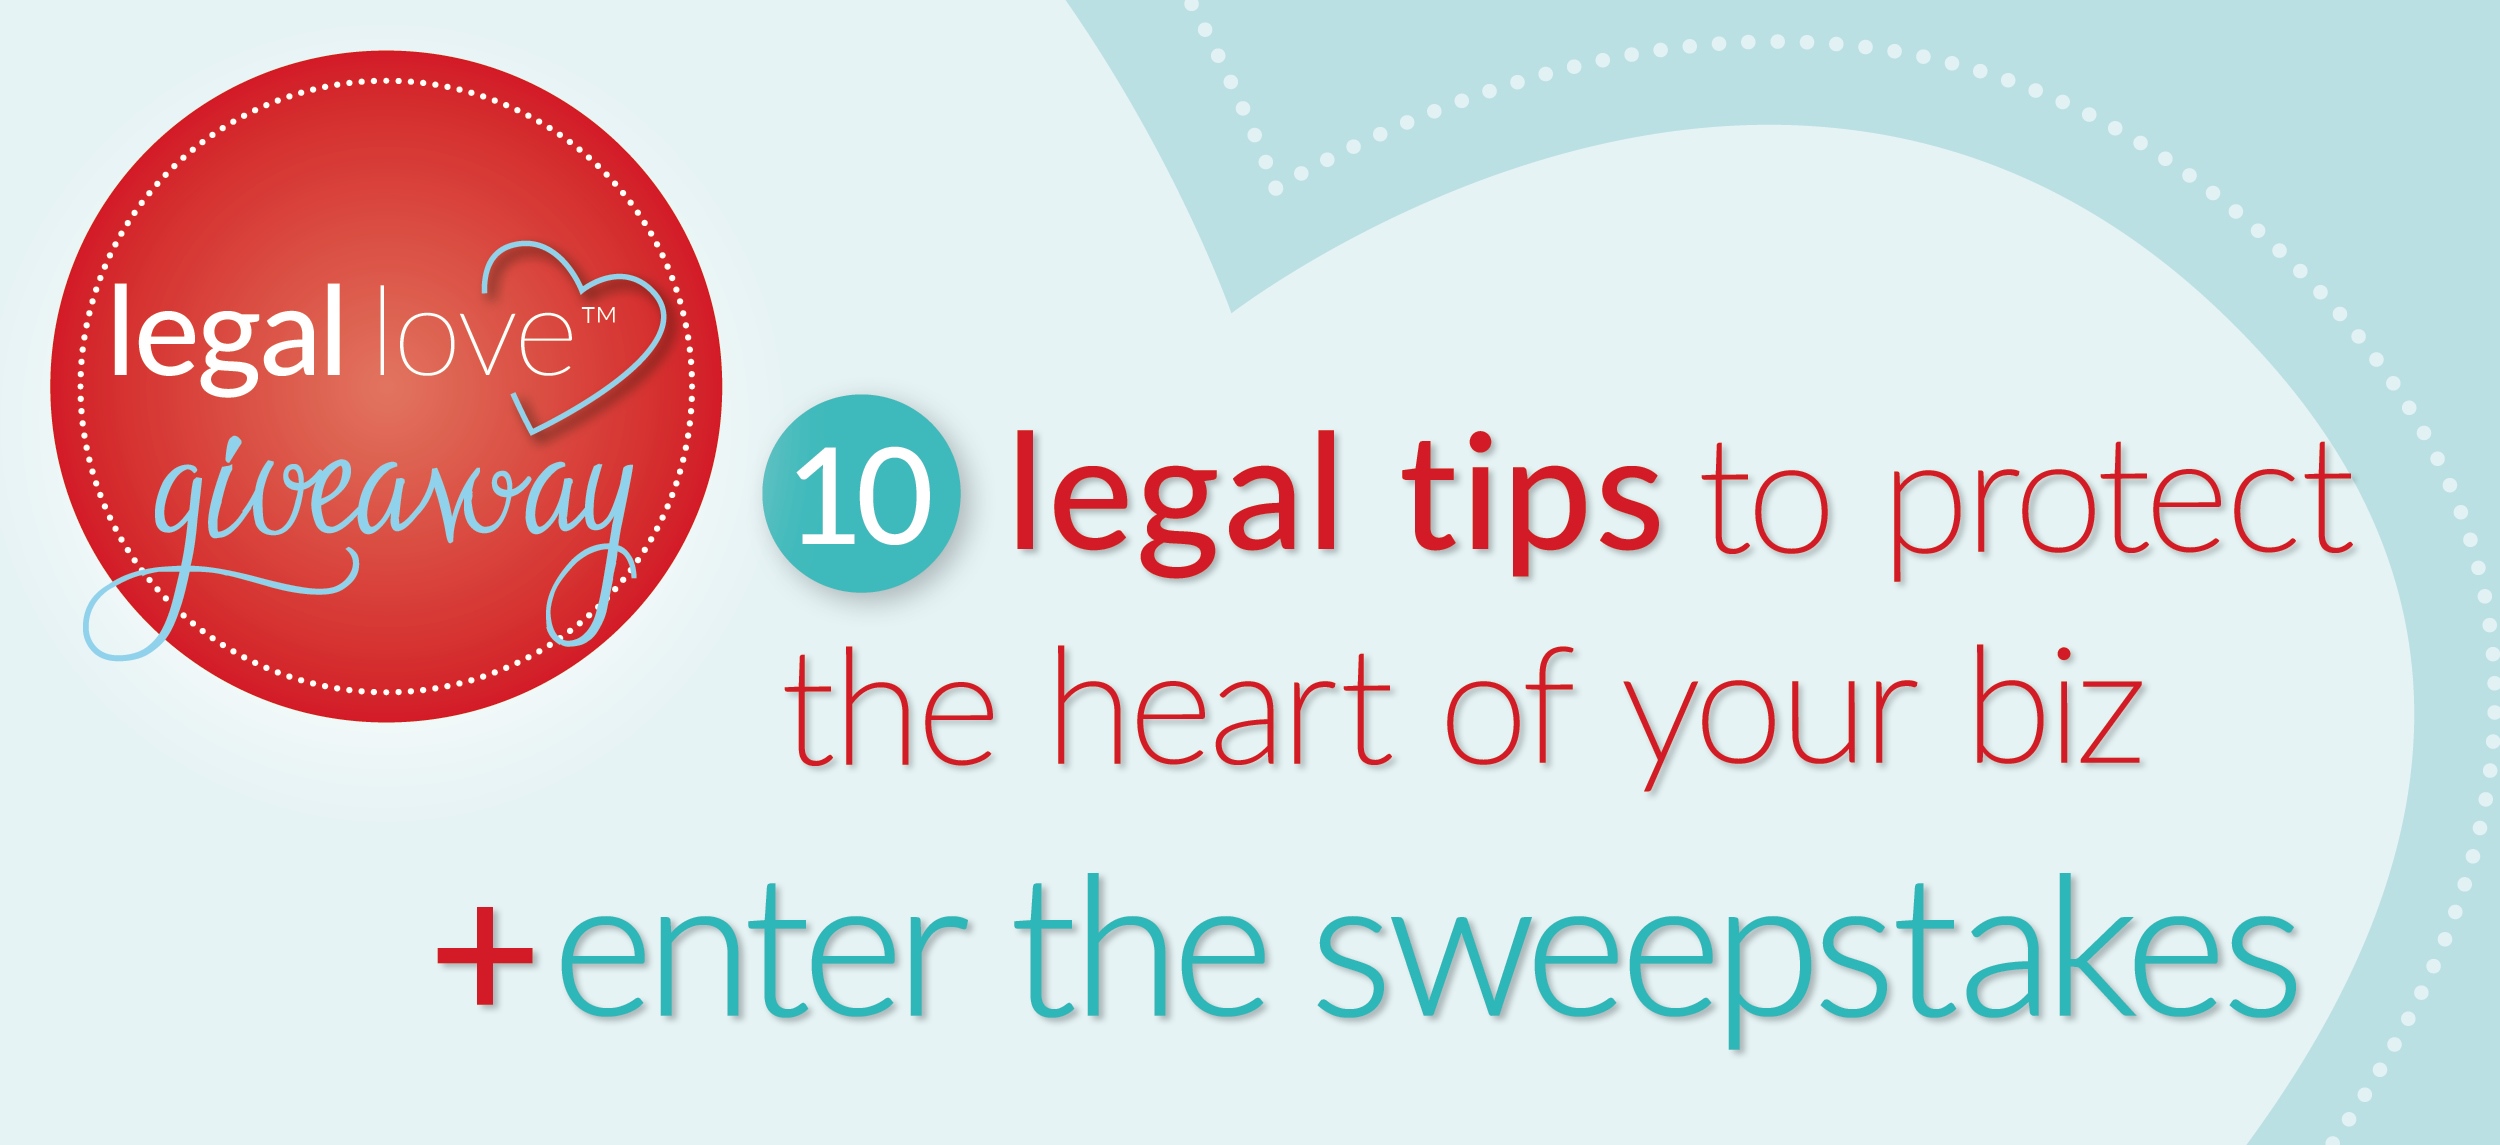 Legal Love Giveaway